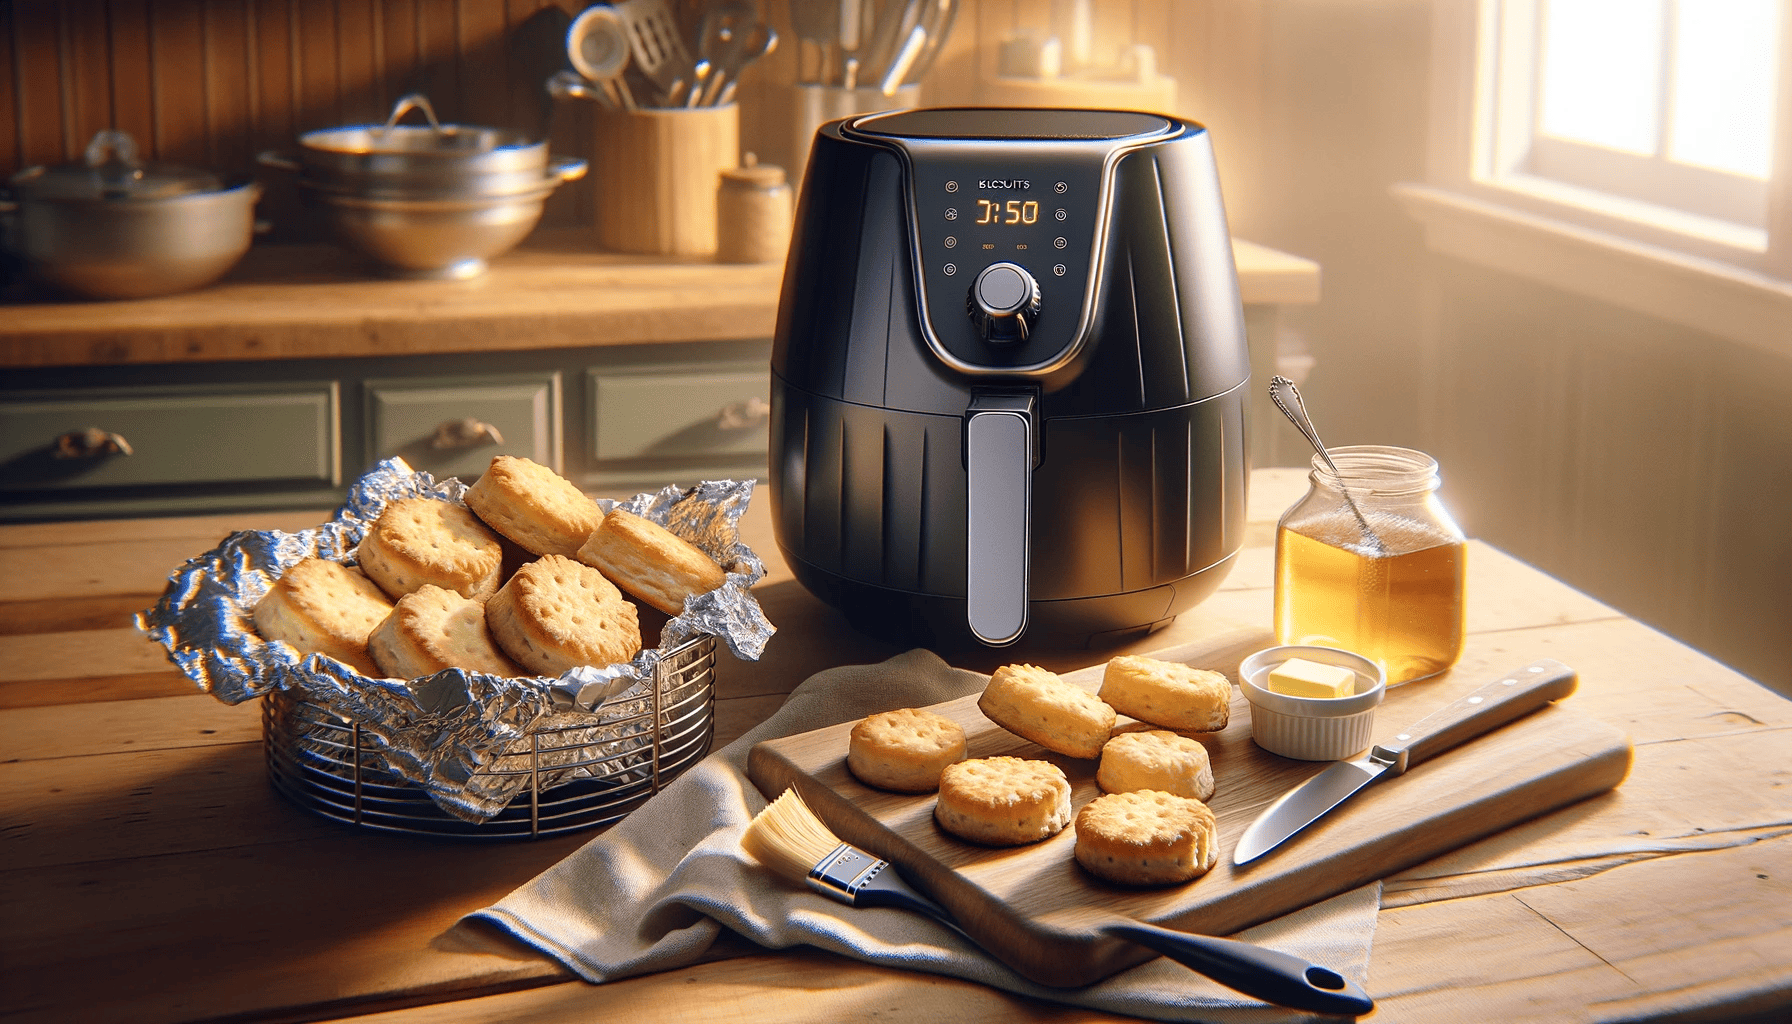 How to Reheat Biscuits in Air Fryer